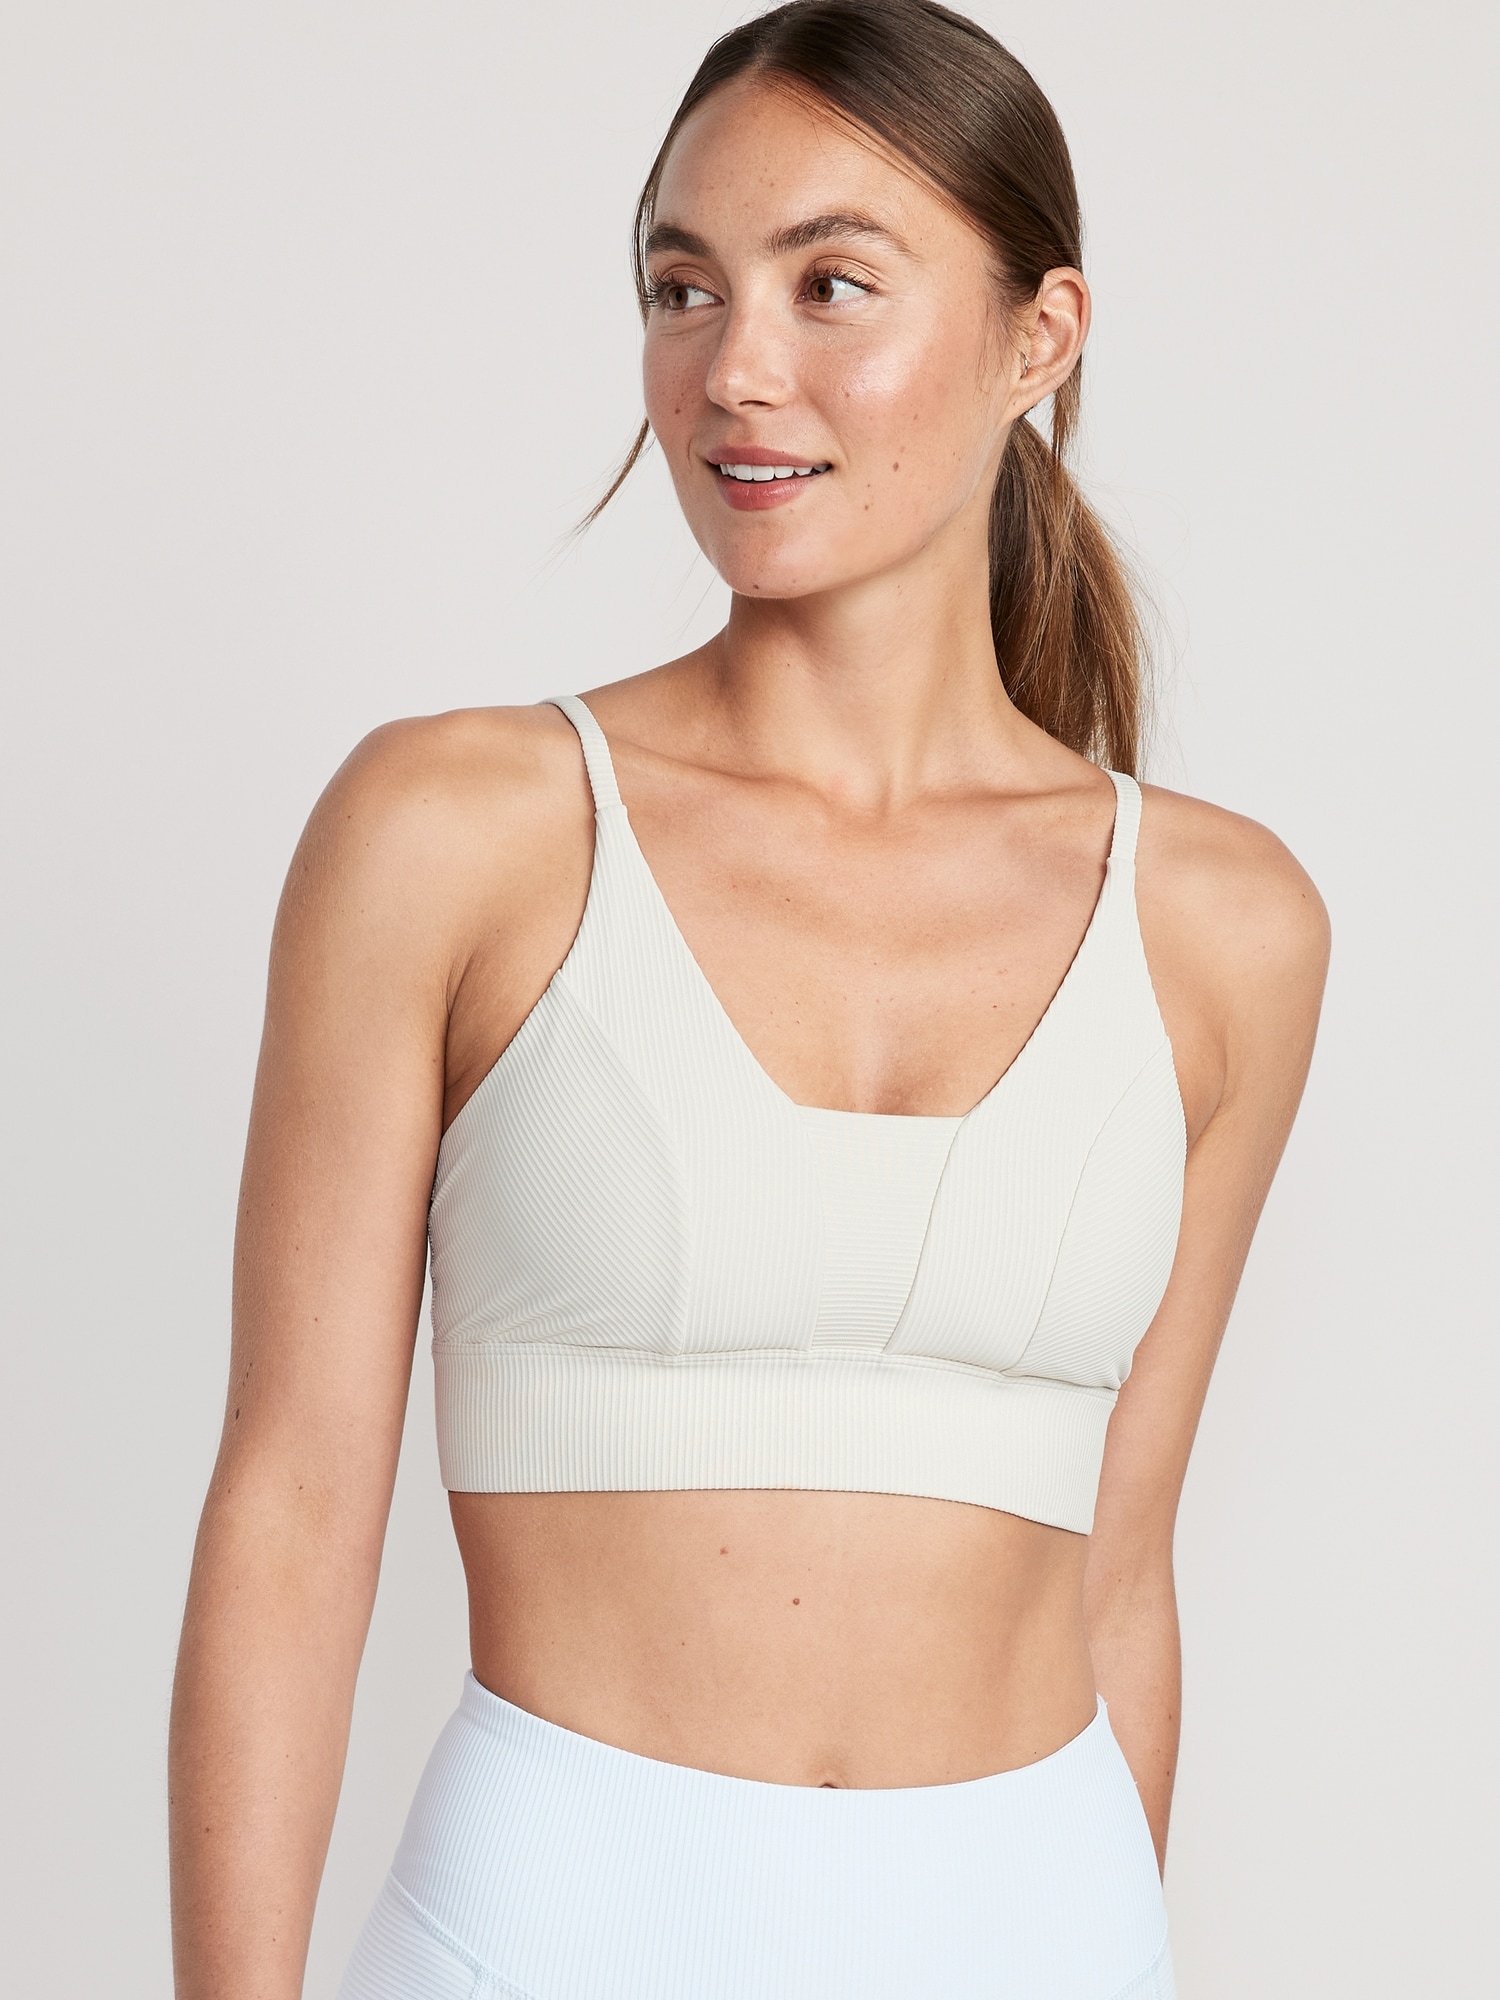 Old Navy - Light Support PowerSoft Adjustable Longline Sports Bra for Women  white